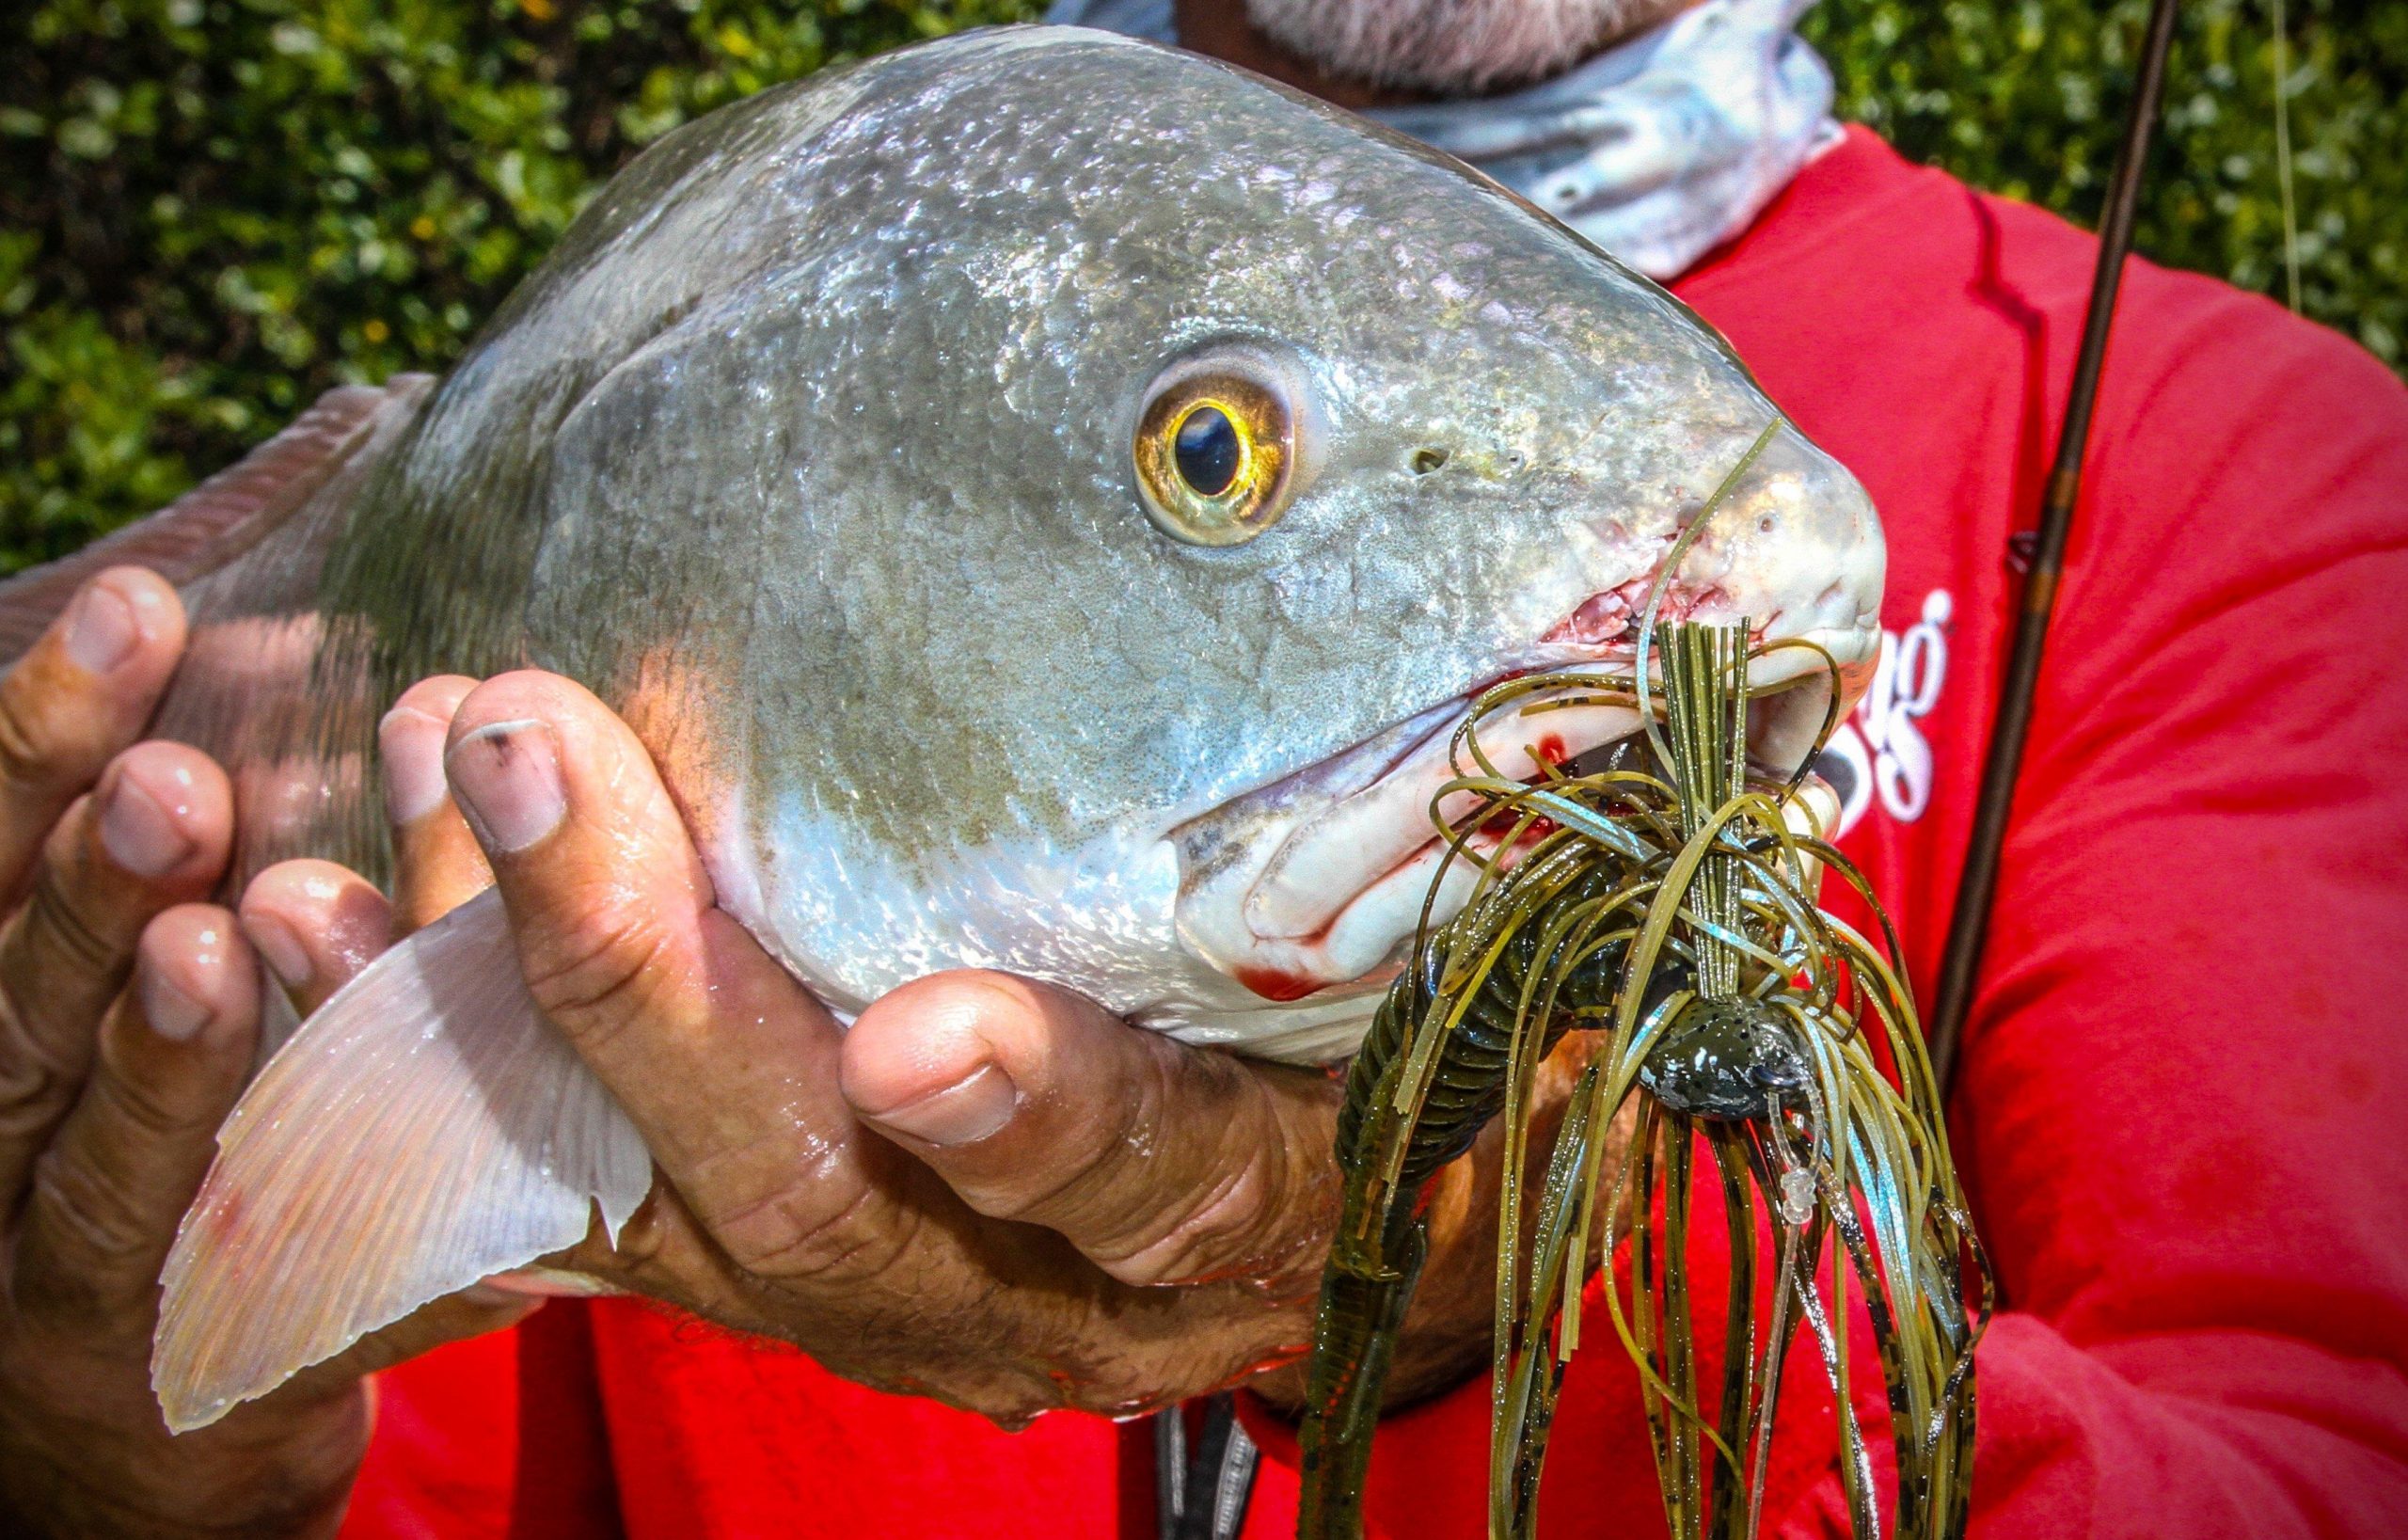 How to bring in redfish quickly! #tnt #fishing #catch 